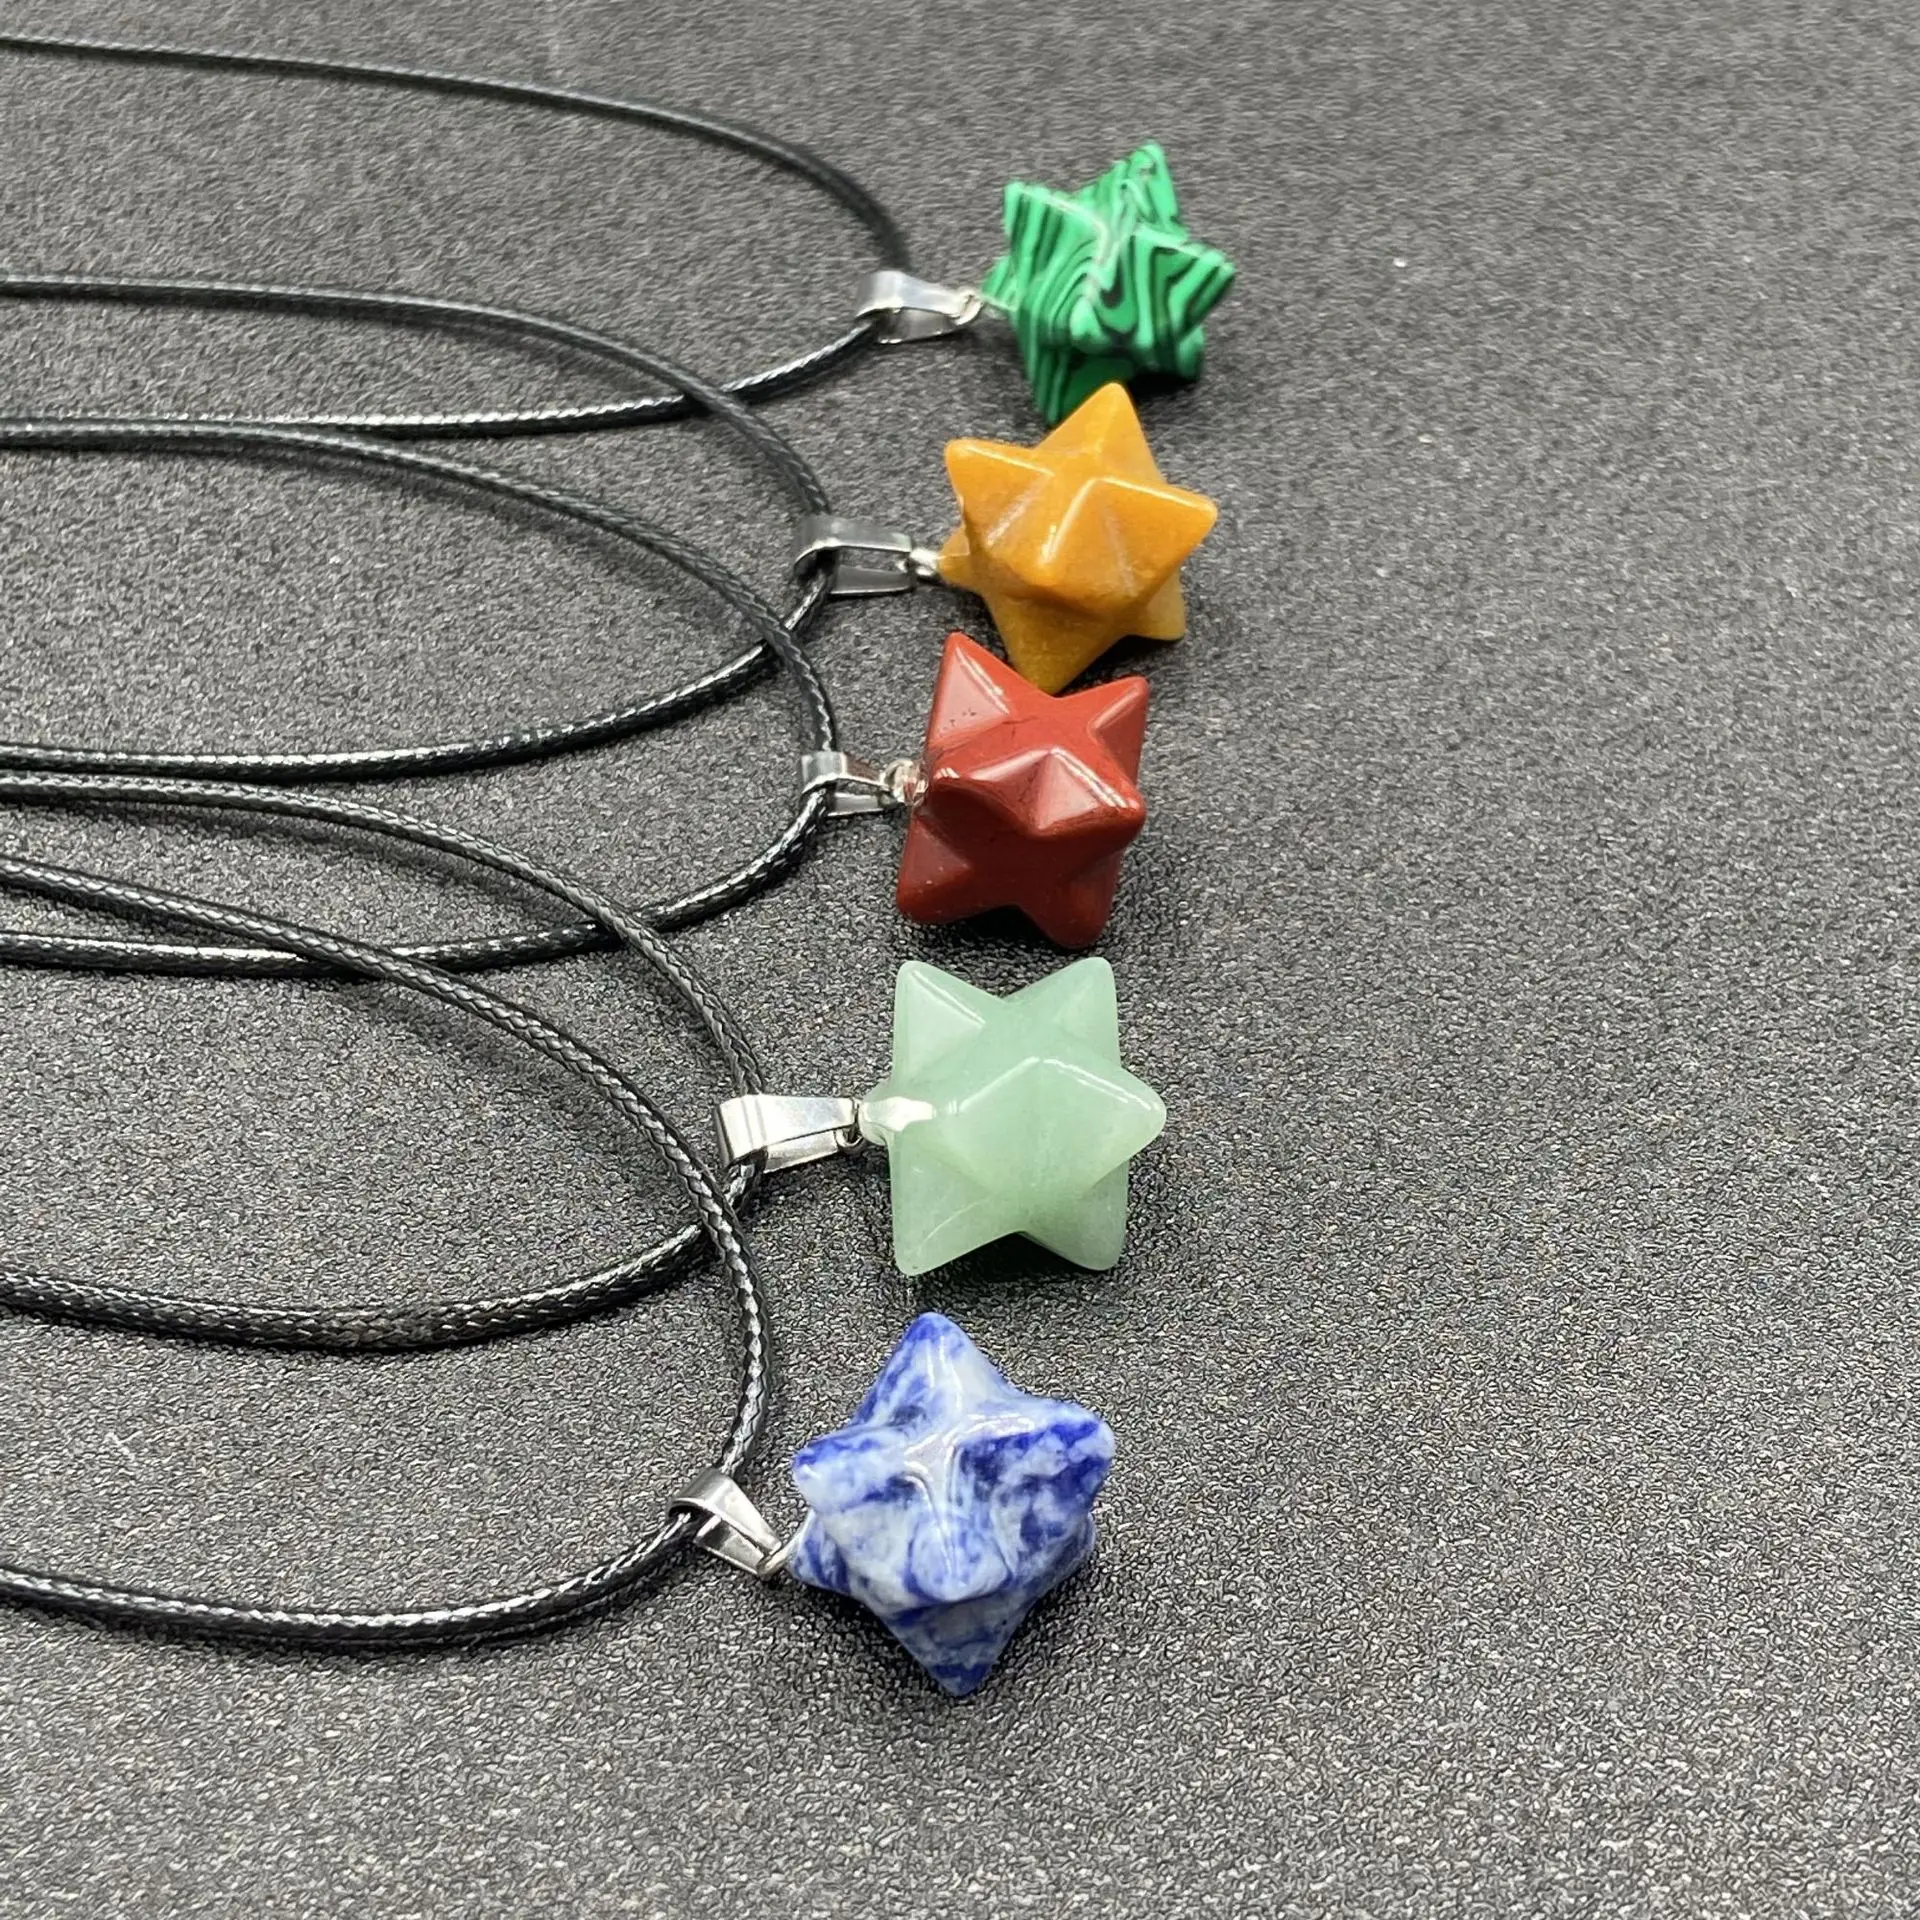 

Wholesale Natural Stone Crystal Quartz Merkaba Pendant Necklace Agate Gemstone Pendant Stainless Steel Chain Jewelry